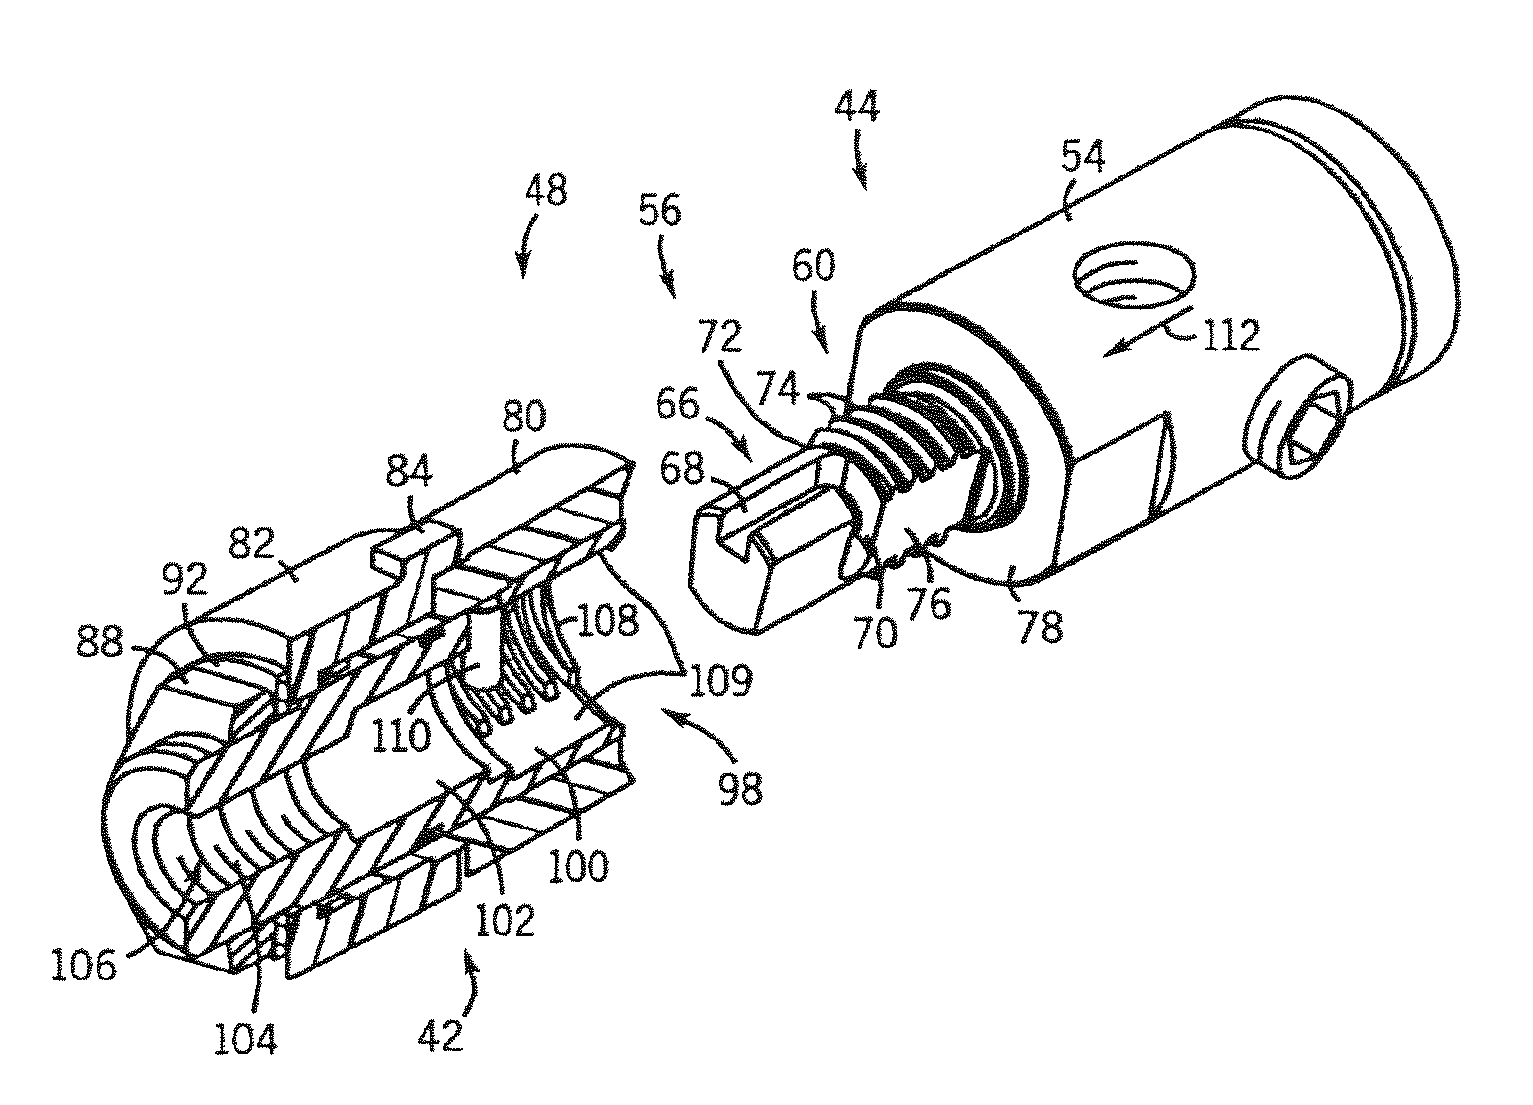 High-power electrical quick connector